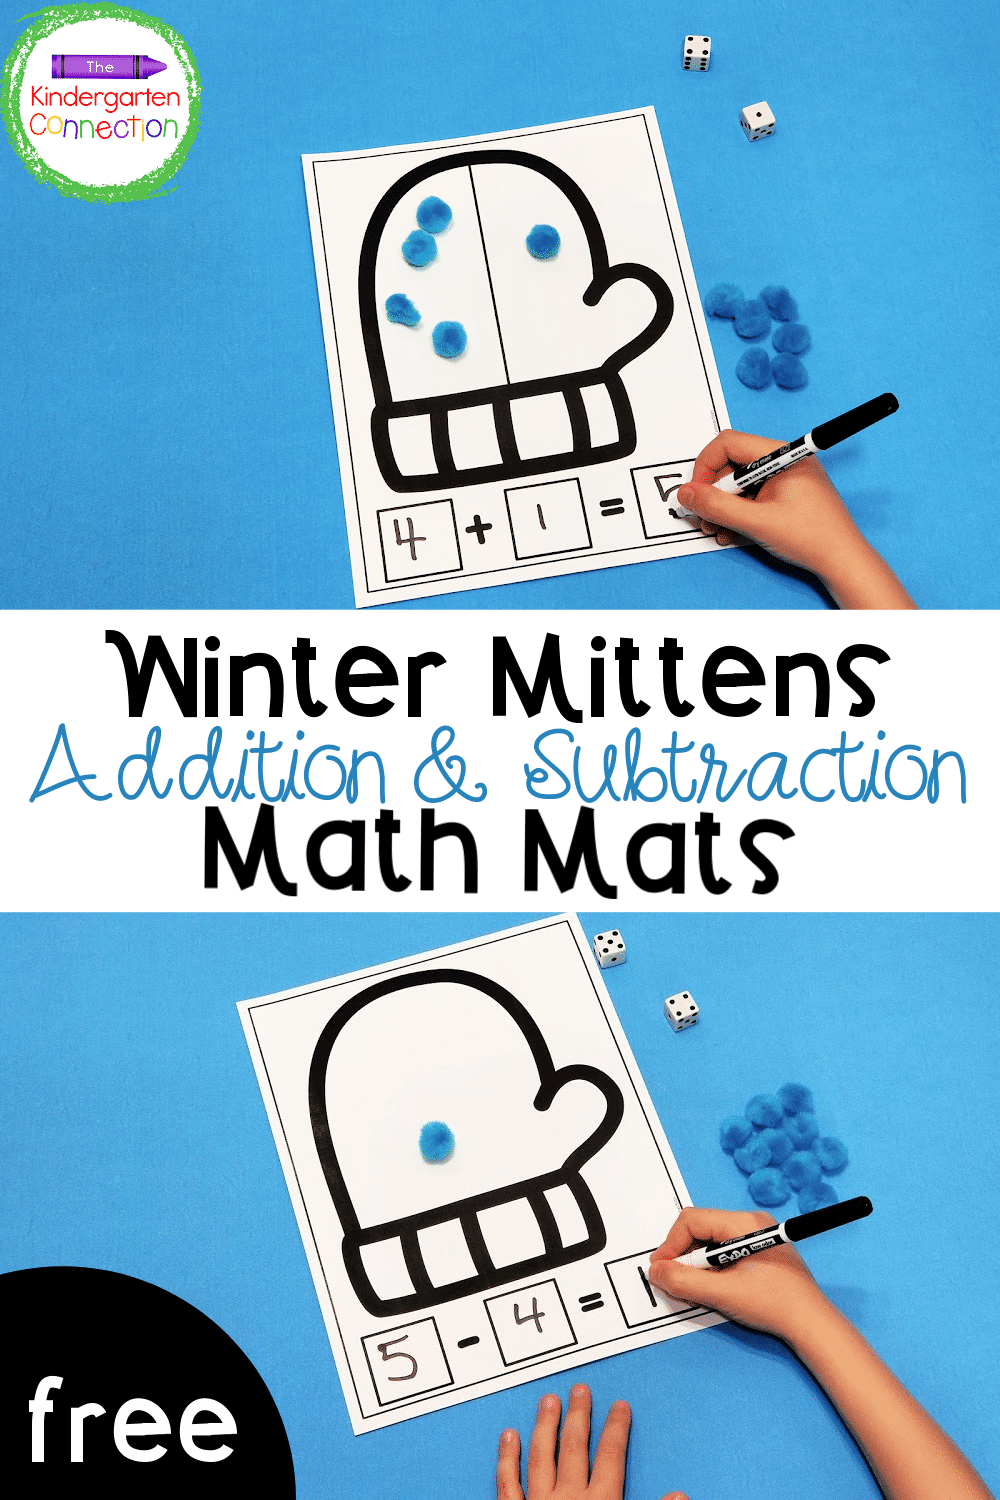 These free printable winter math mats are great for practicing addition and subtraction in a math center for Kindergarten or 1st grade!